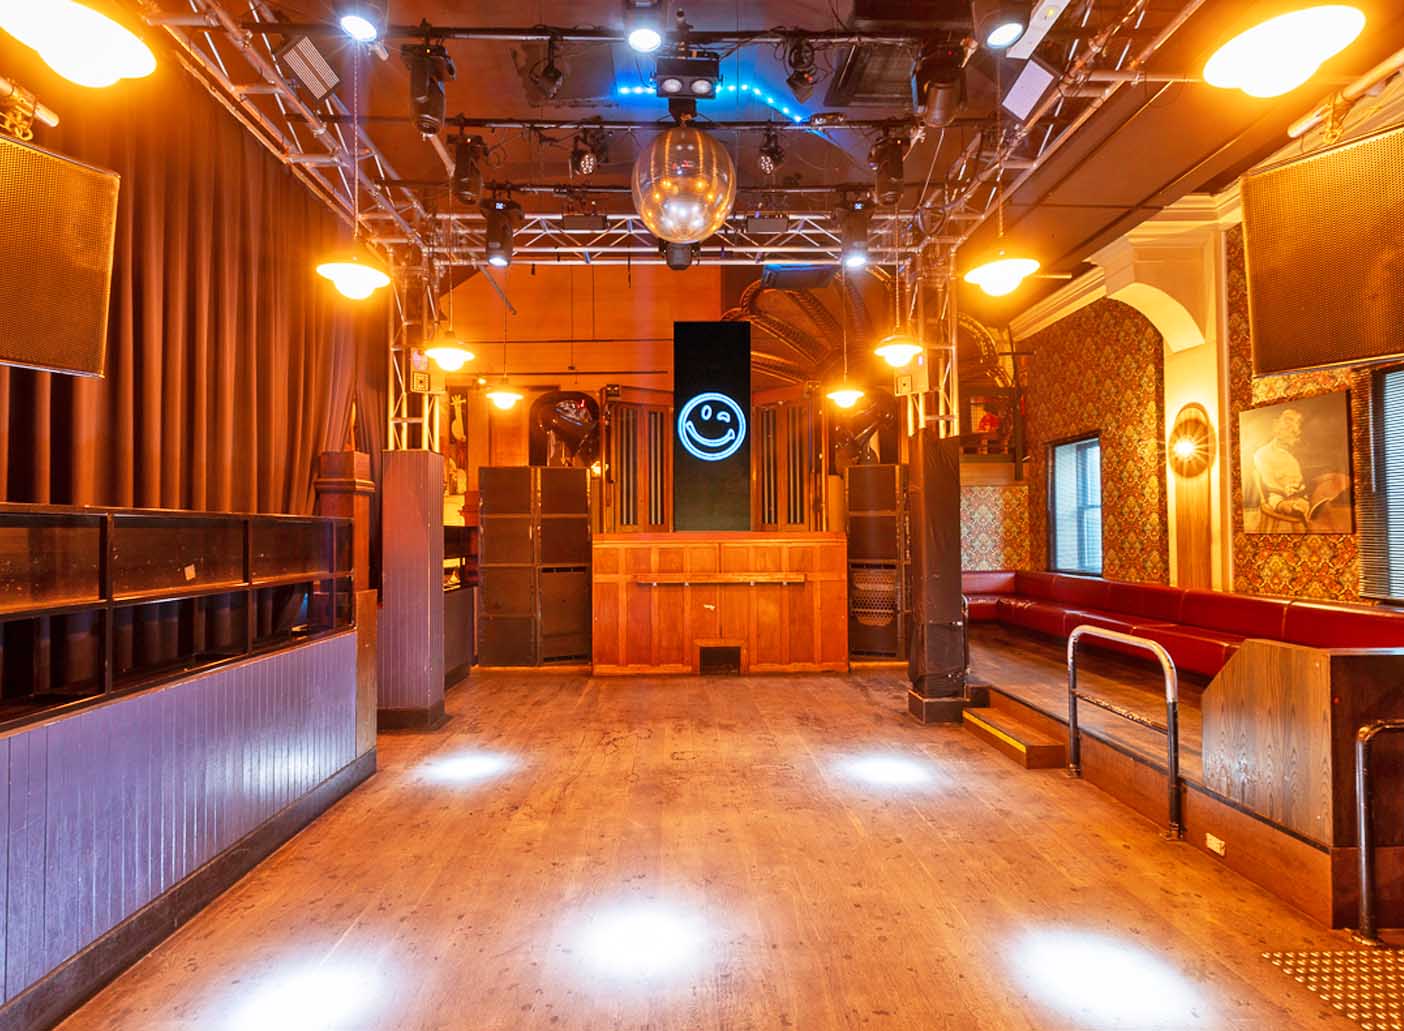 New Guernica <br> Smith St Function Venues